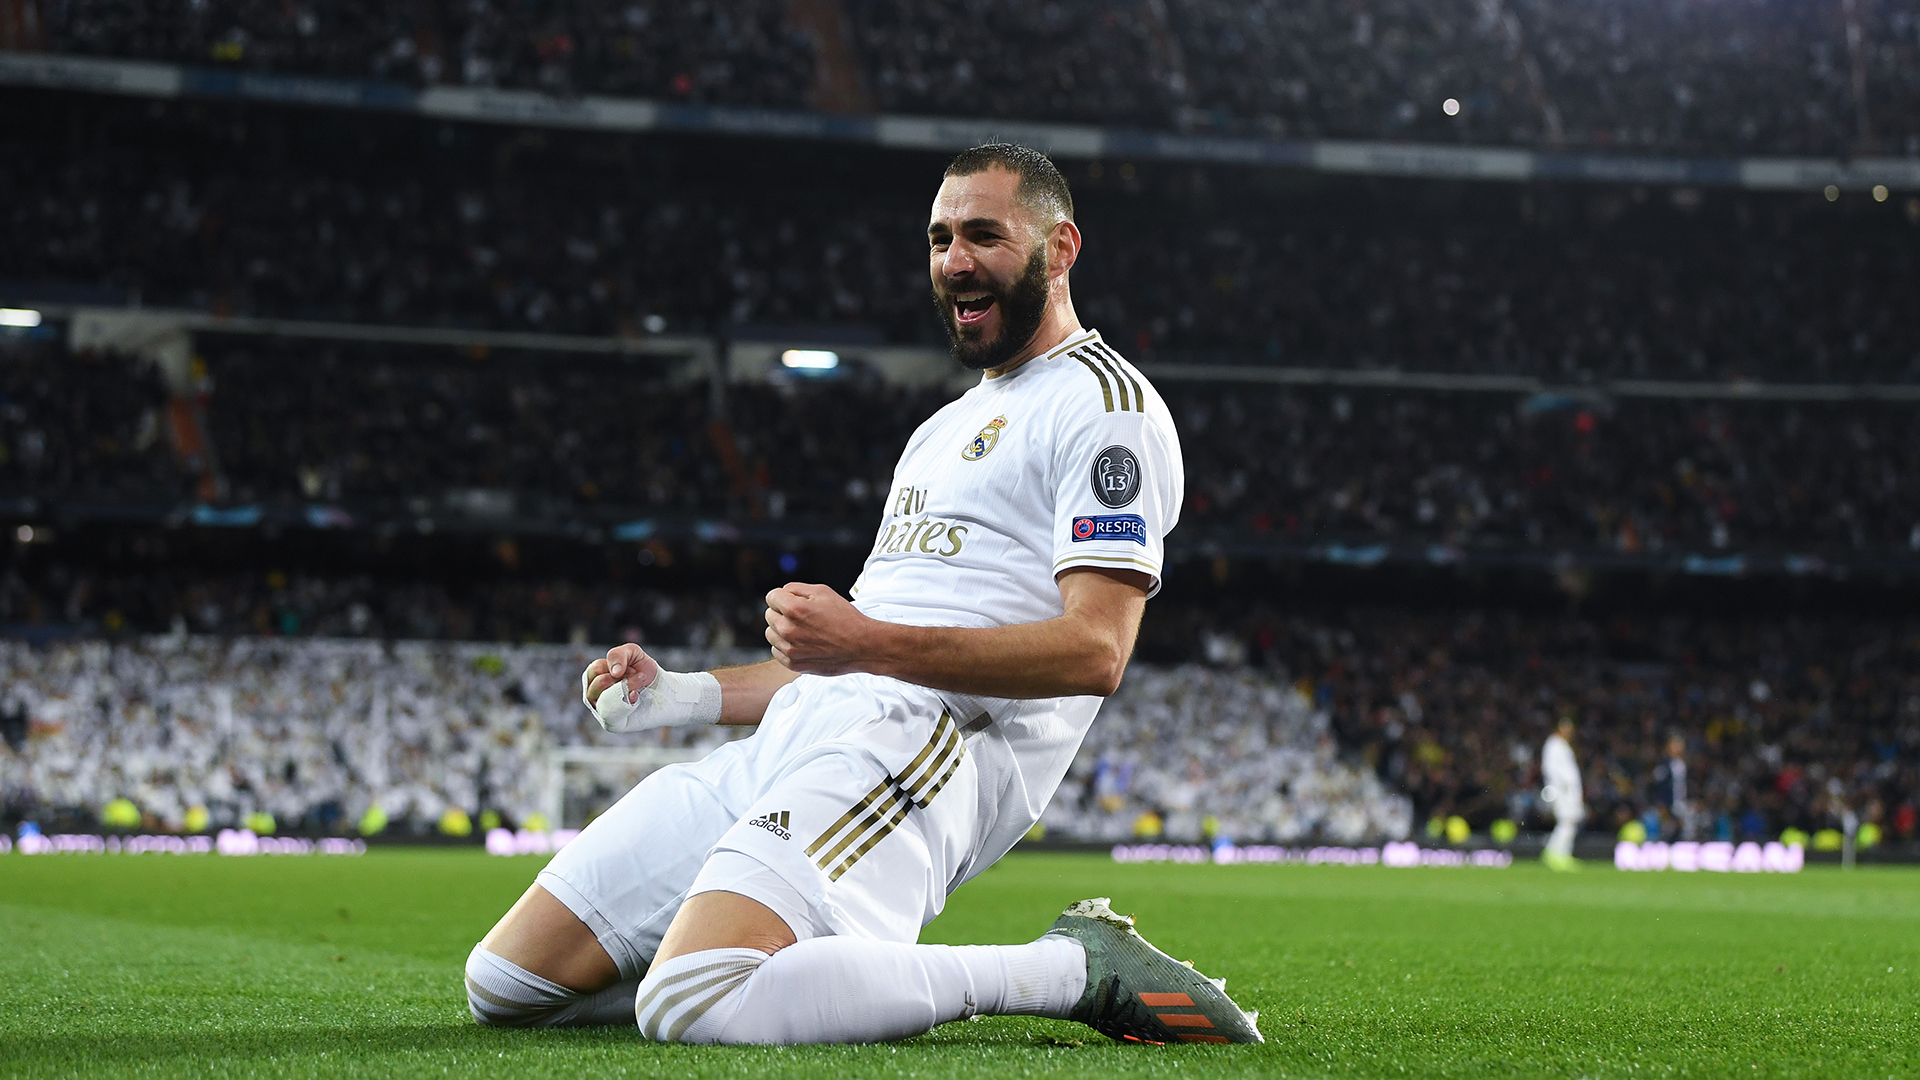 Karim Benzema 'signs one-year contract extension at Real Madrid' but LaLiga giants will not announce deal until the end of the season - Bóng Đá